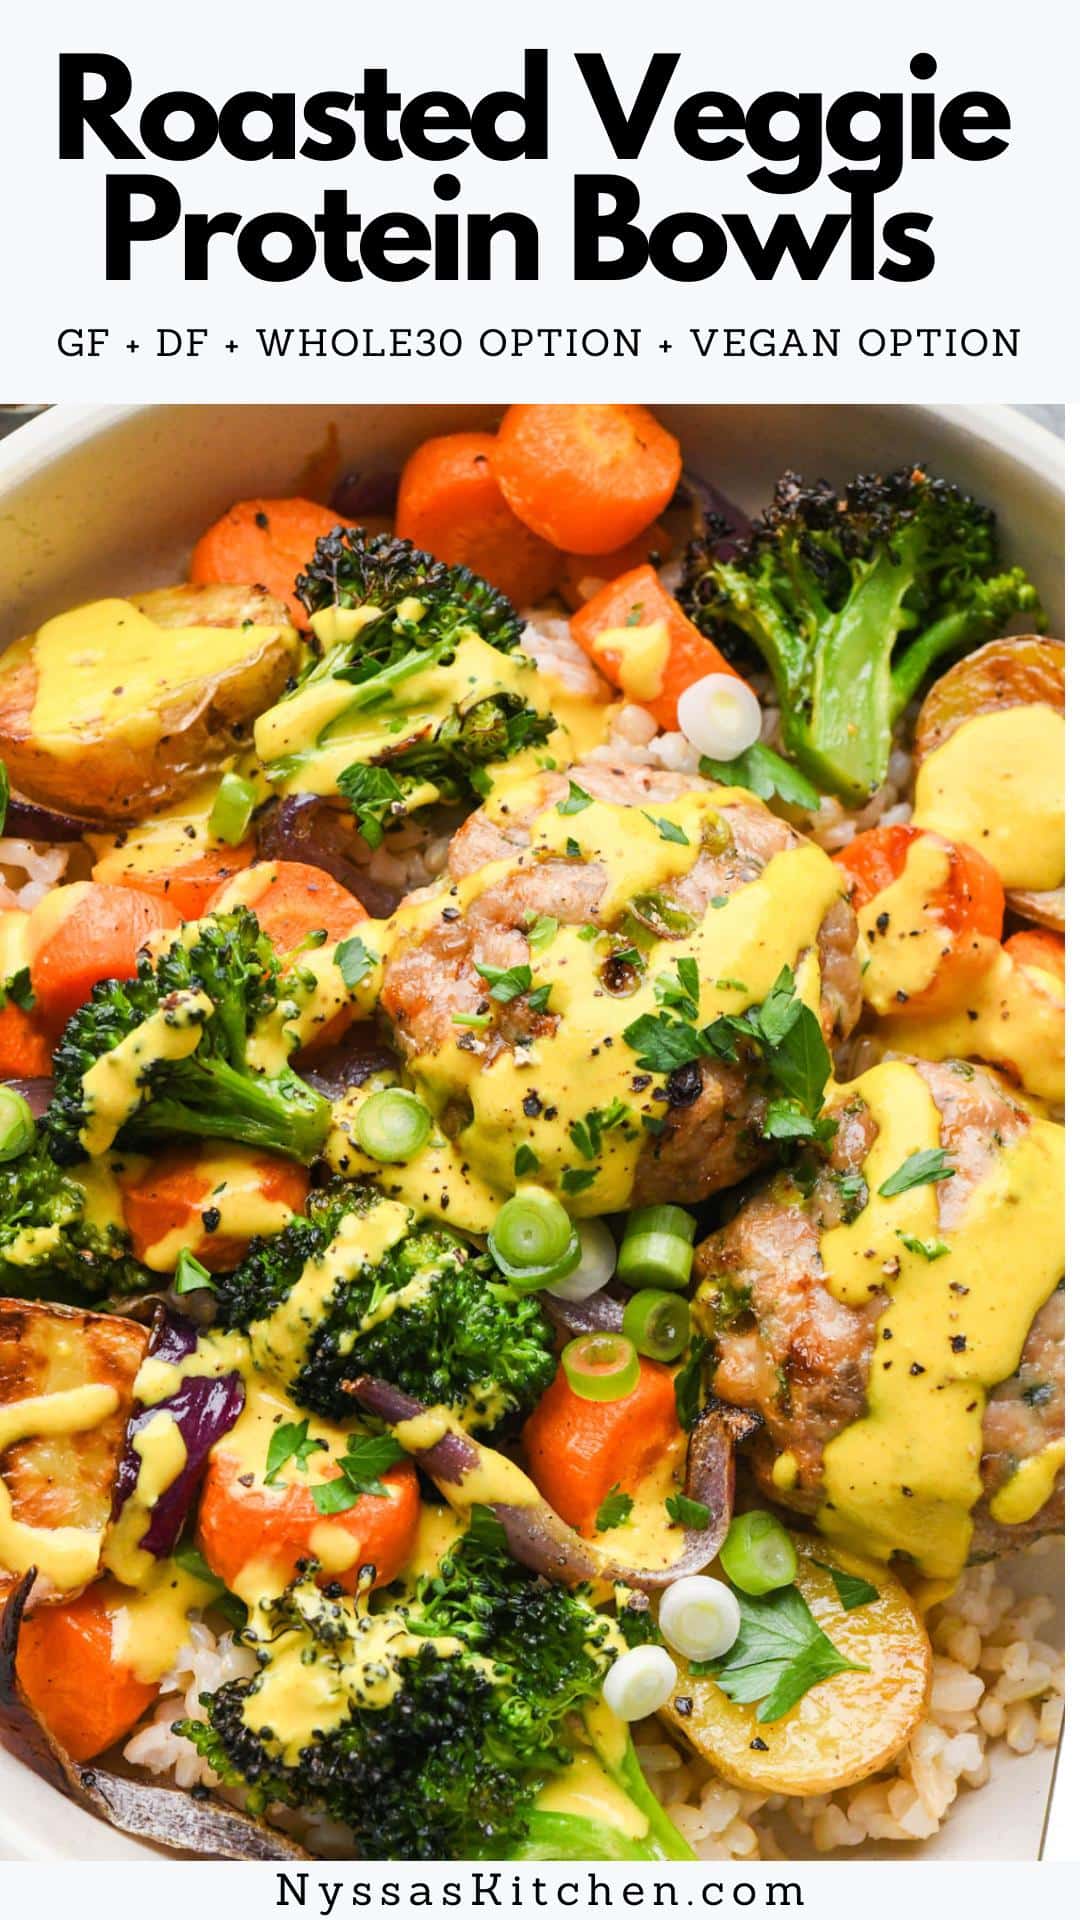 These roasted veggie protein bowls with turmeric tahini and flavorful chicken patties are a delicious healthy lunch or dinner option! Perfect for meal prep or a quick and easy family meal that everyone will love. They are prepped on a single sheet pan and made with a colorful array of vegetables for tons of nutrients! Gluten free, with Paleo, Whole30, and vegan / vegetarian options.